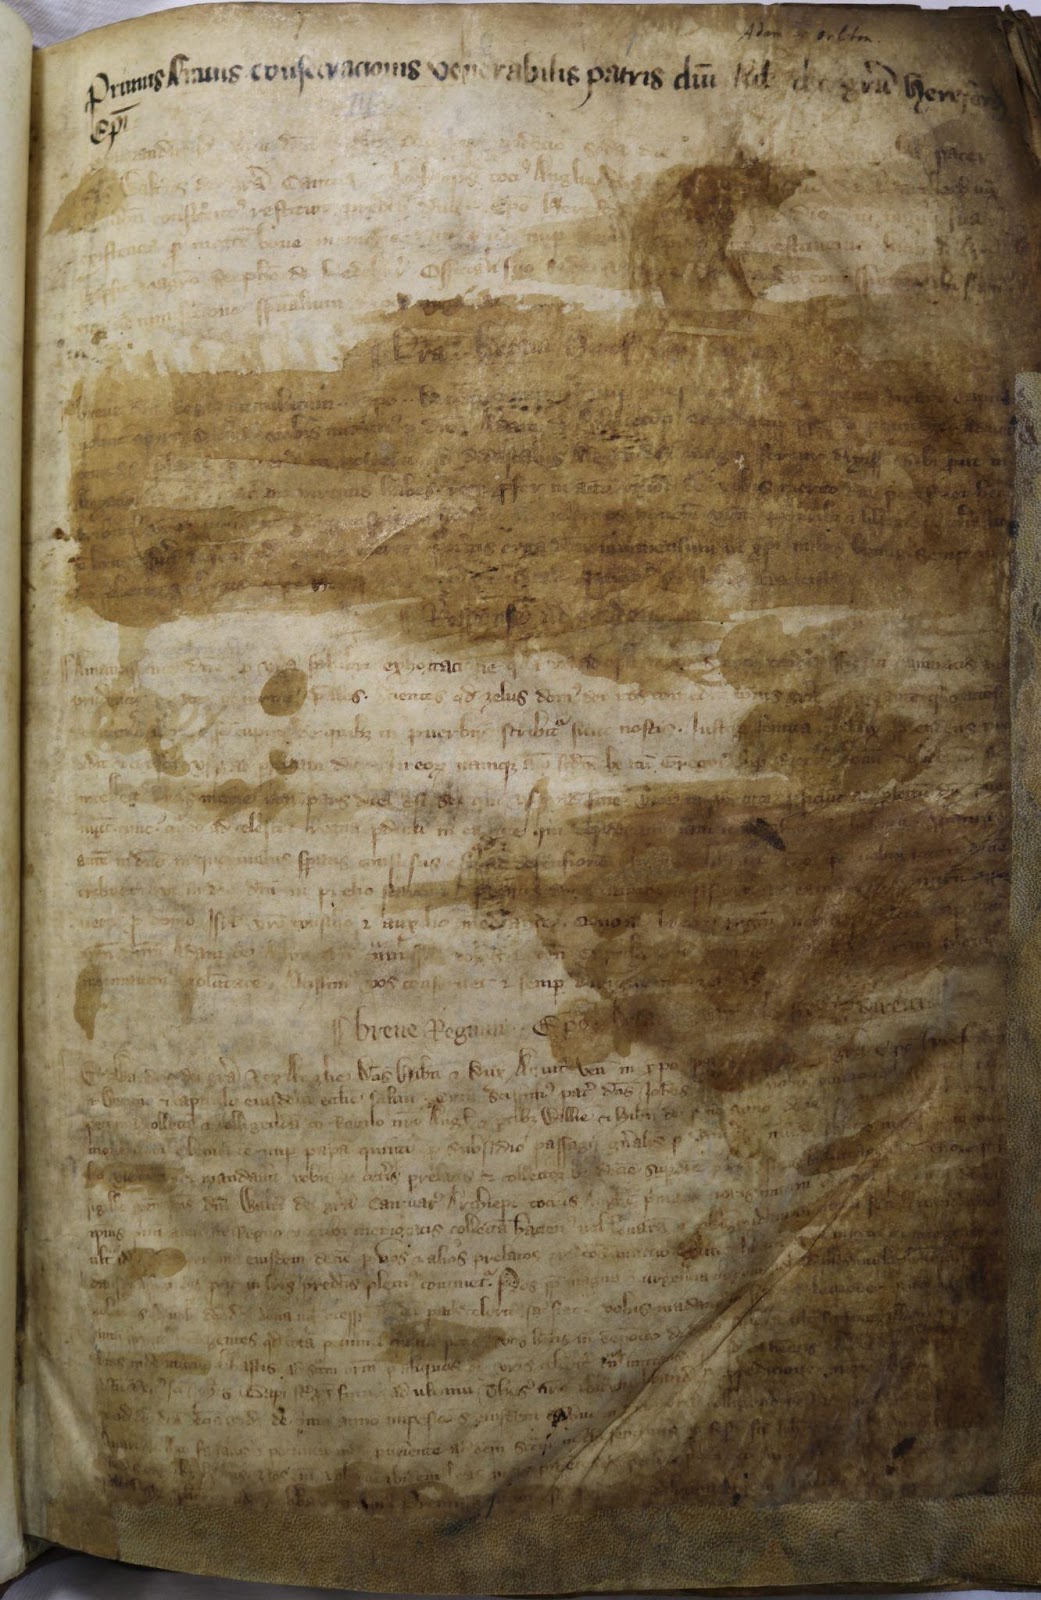 A manuscript page with Latin text